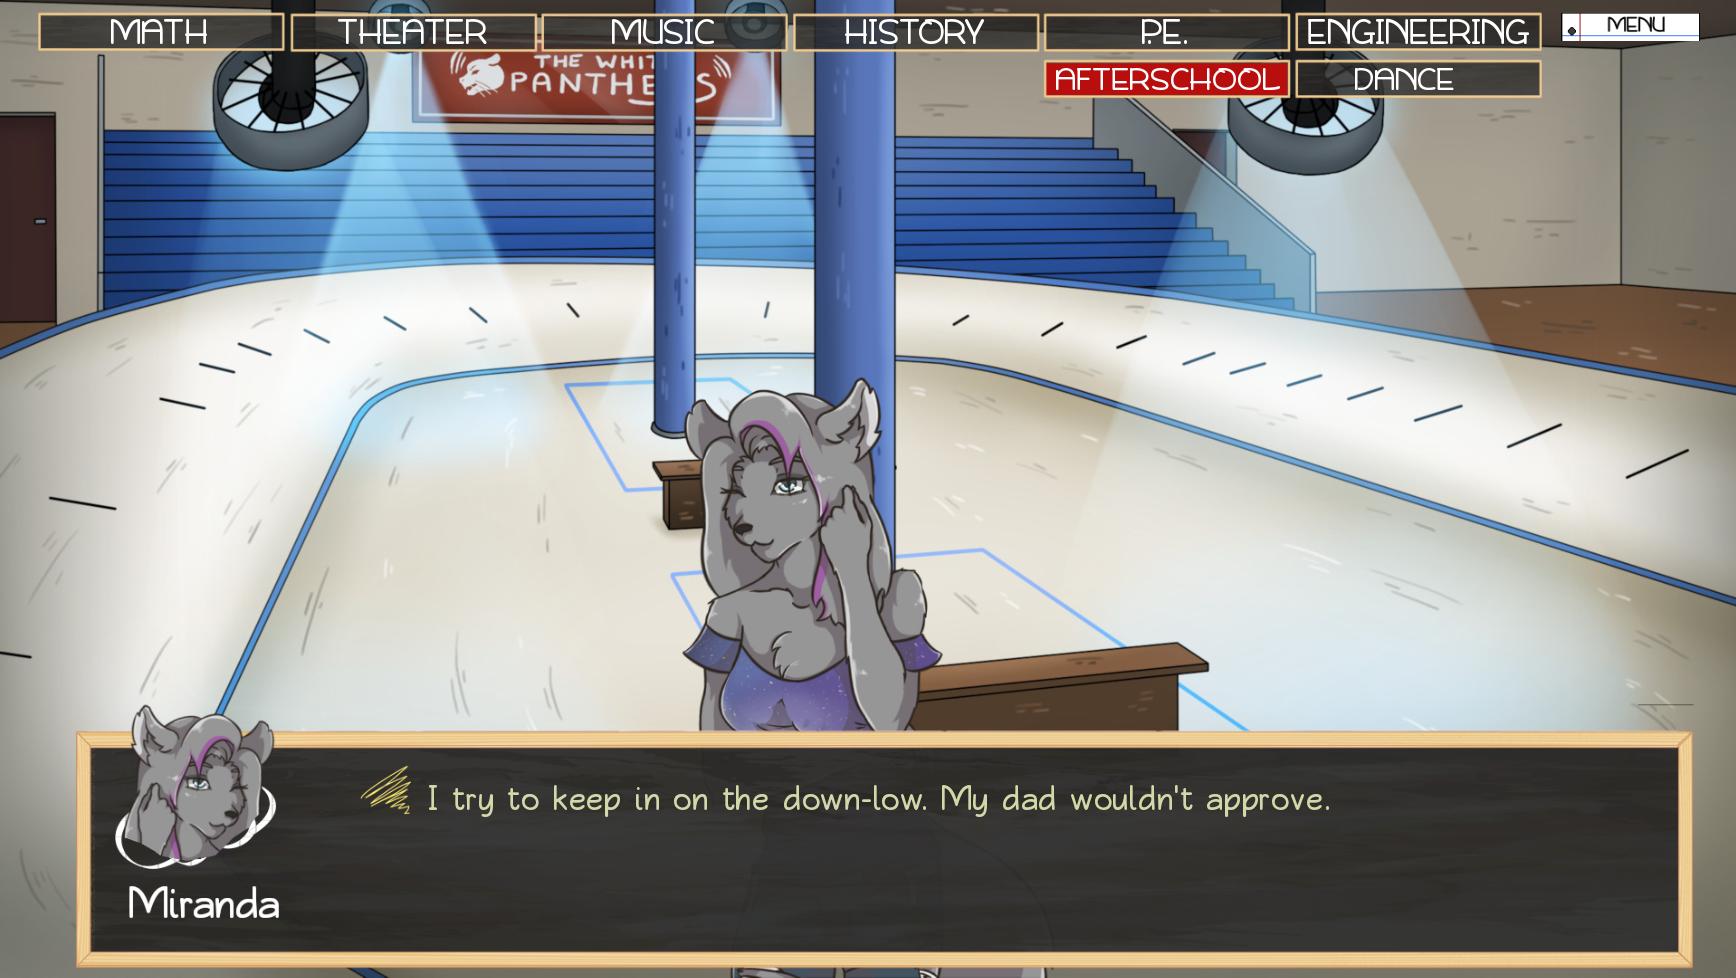 Furry Shakespeare: To Date Or Not To Date Spooky Cat Girls? Steam'de